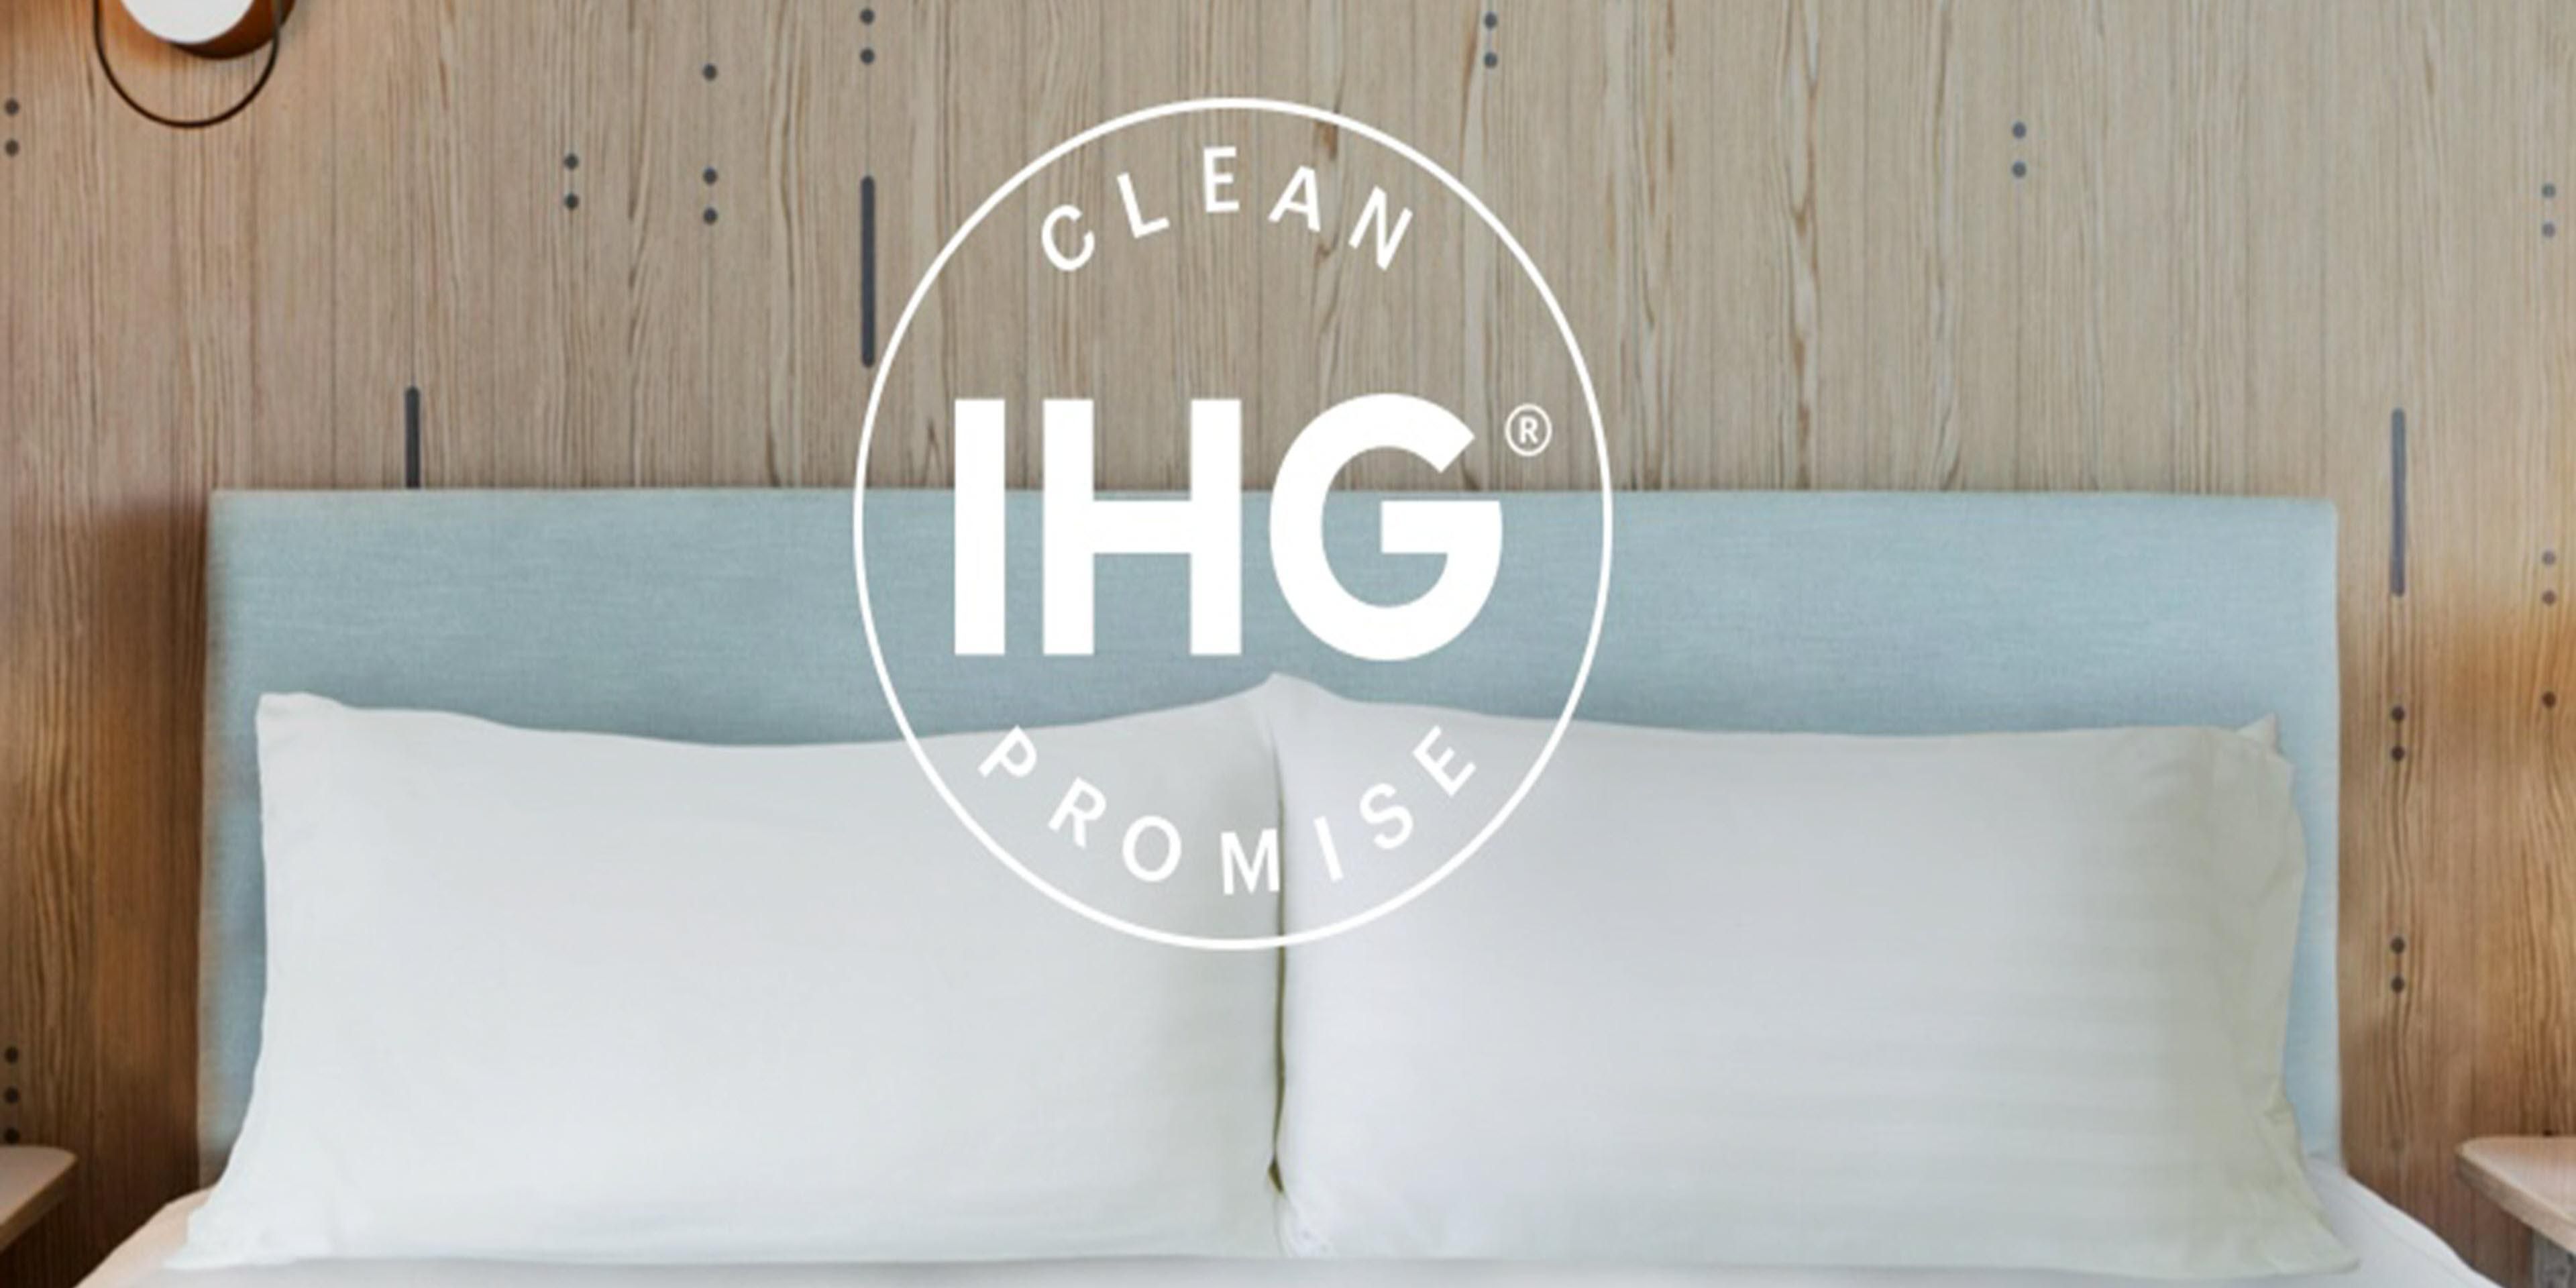 As the world adjusts to new travel norms and expectations, we’re enhancing the experience for you – our hotel guests – by redefining cleanliness and supporting your wellbeing throughout your stay. We have expanded our commitment to cleanliness.